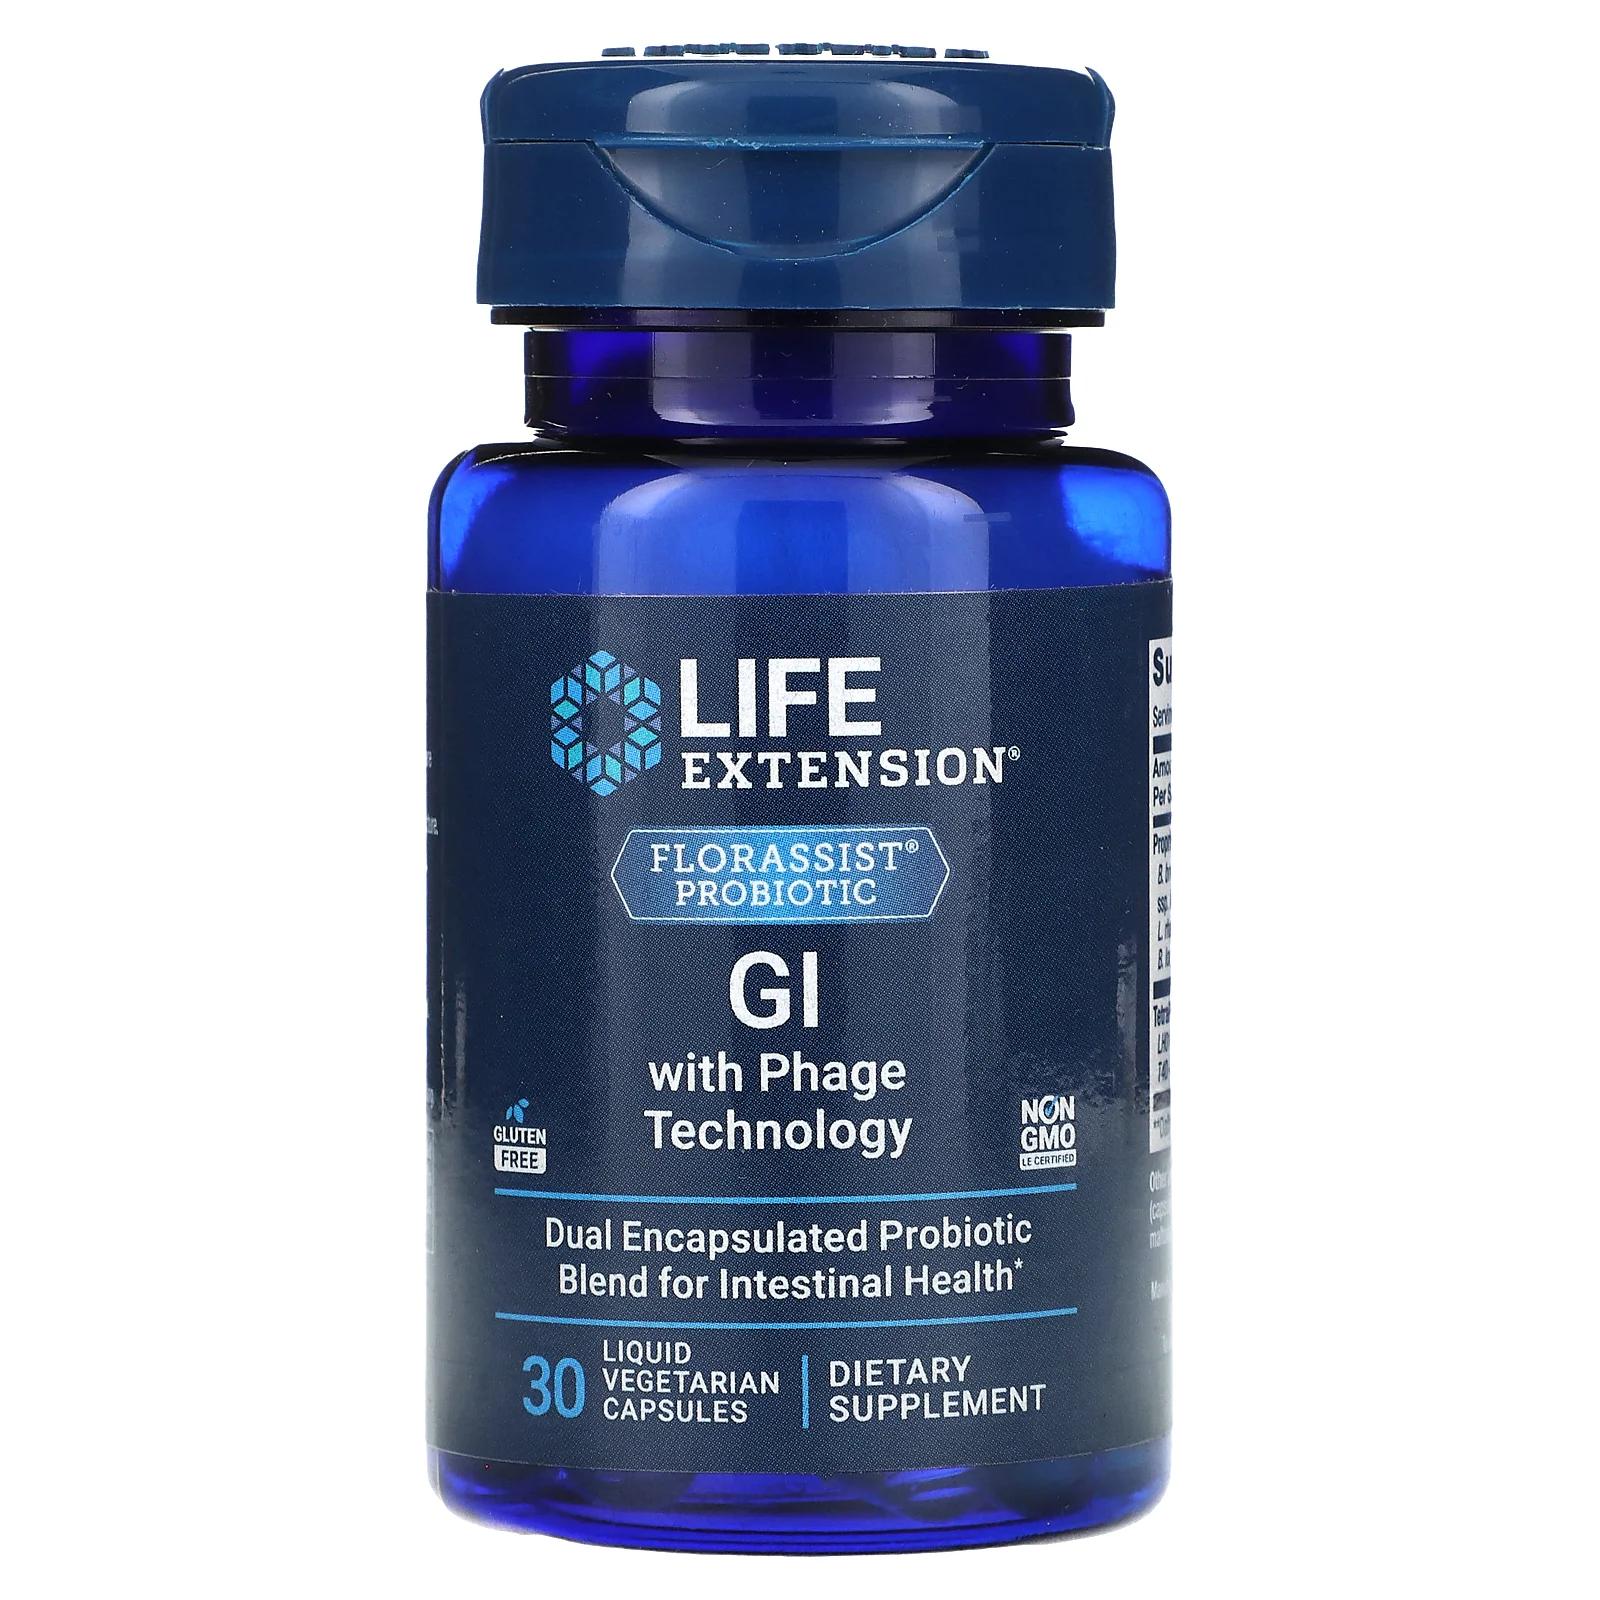 life extension optimized quercetin 250 mg 60 vegetarian capsules Life Extension Florassist GI with Phage Technology 30 Liquid Vegetarian Capsules